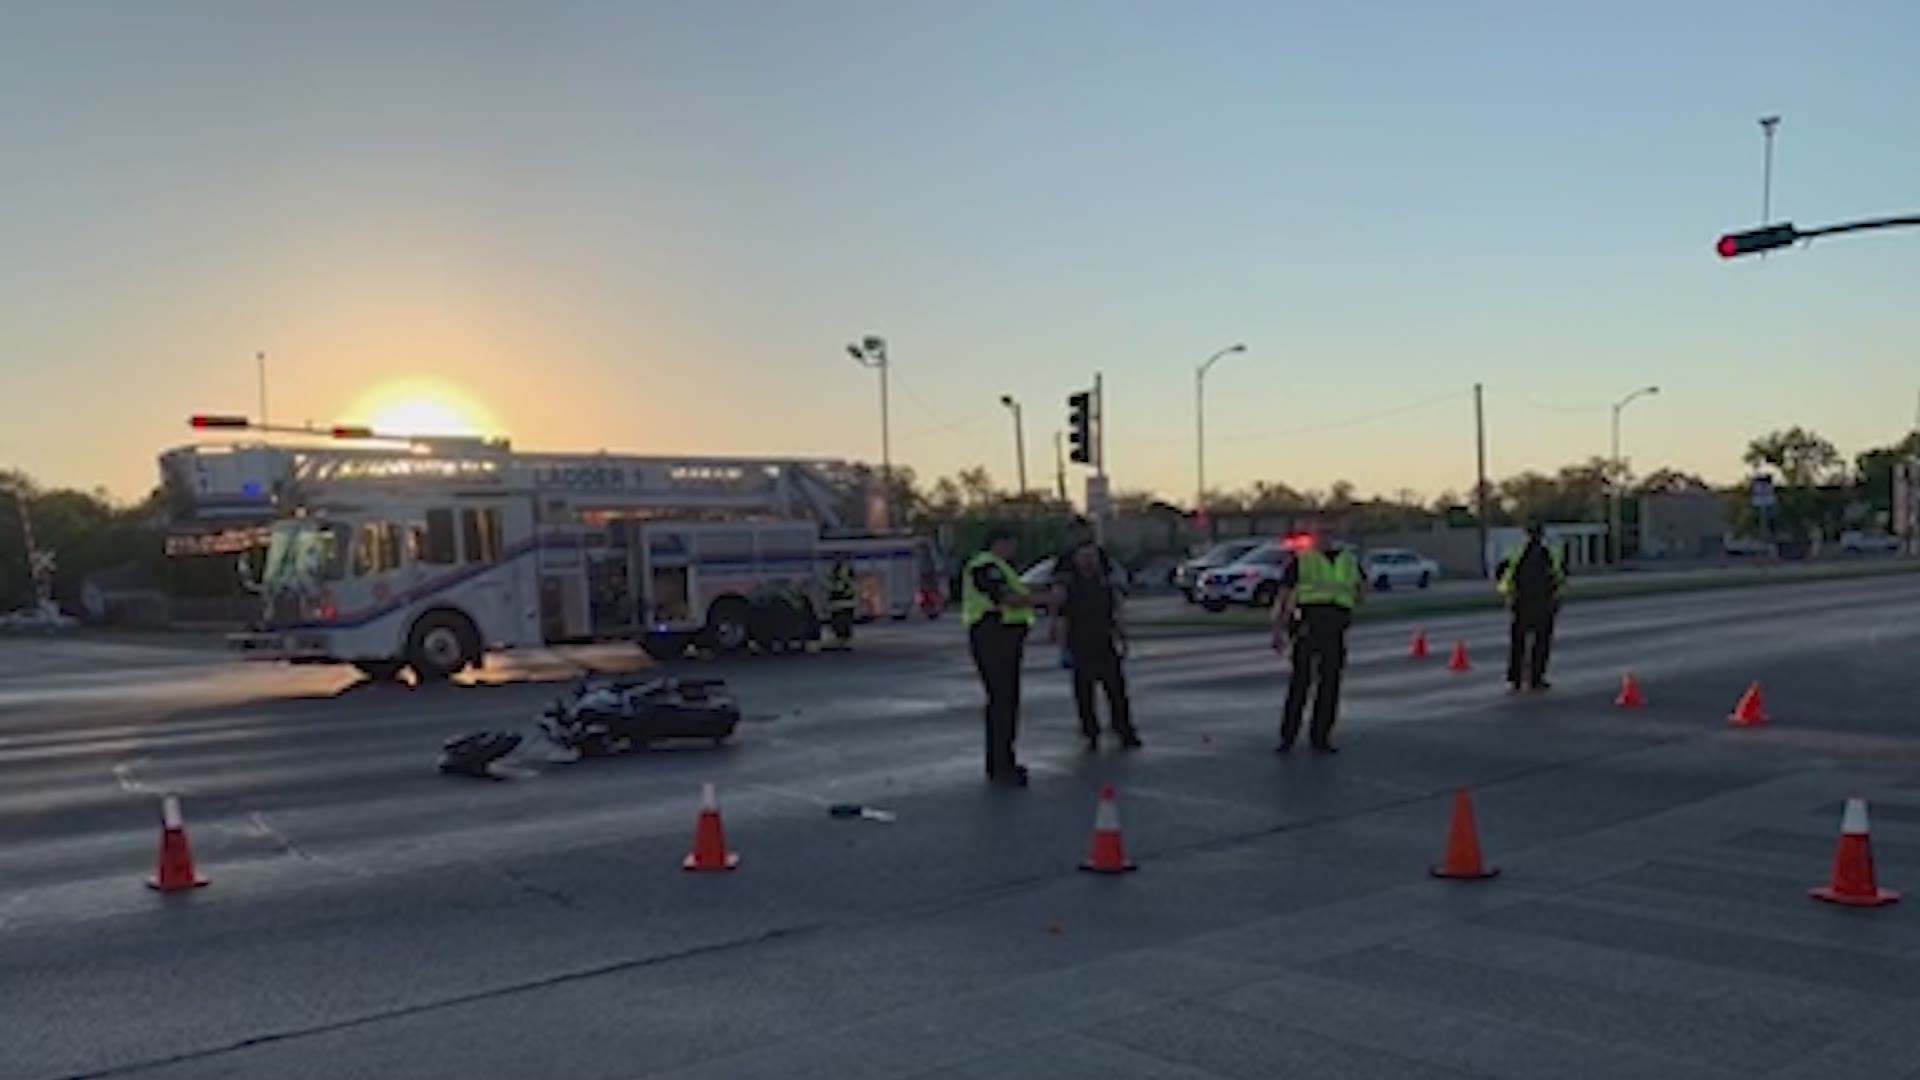 SAPD investigators are looking for a hit-and-run driver who fled the scene of a crash that injured two motorcyclists Sunday evening.